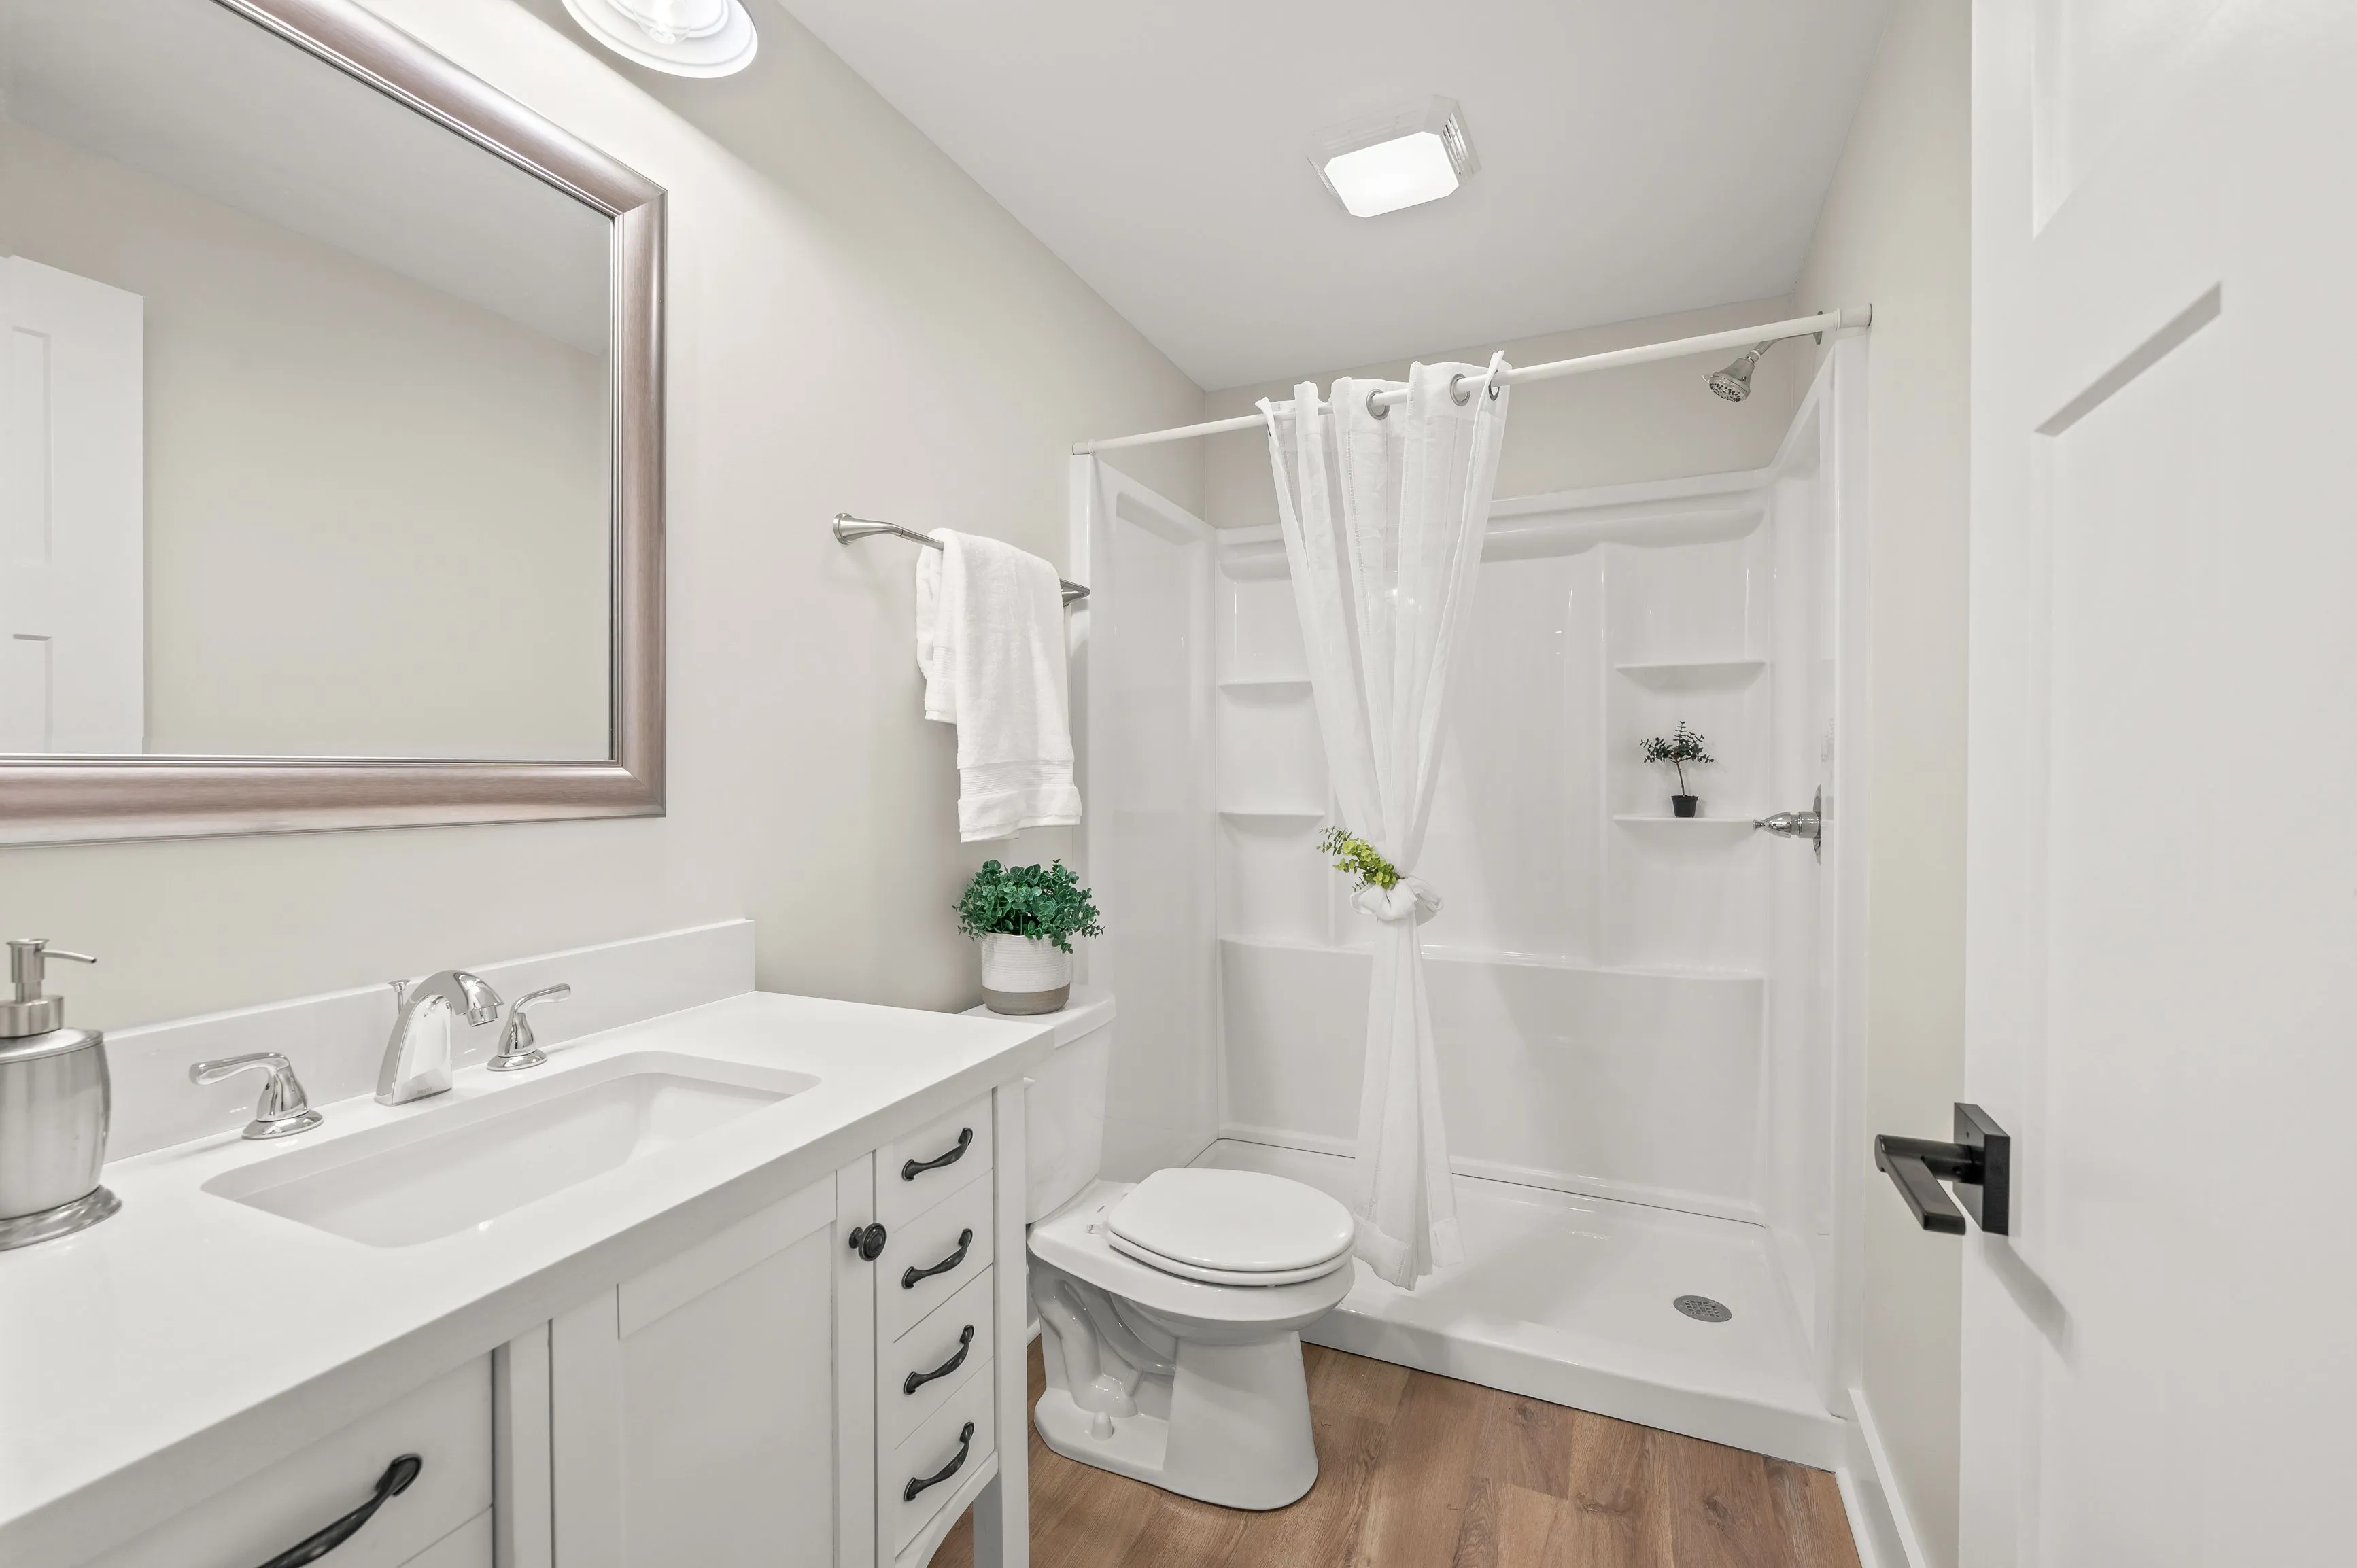 Modern bathroom interior with white vanity cabinet, large mirror, toilet, and shower with white curtain.